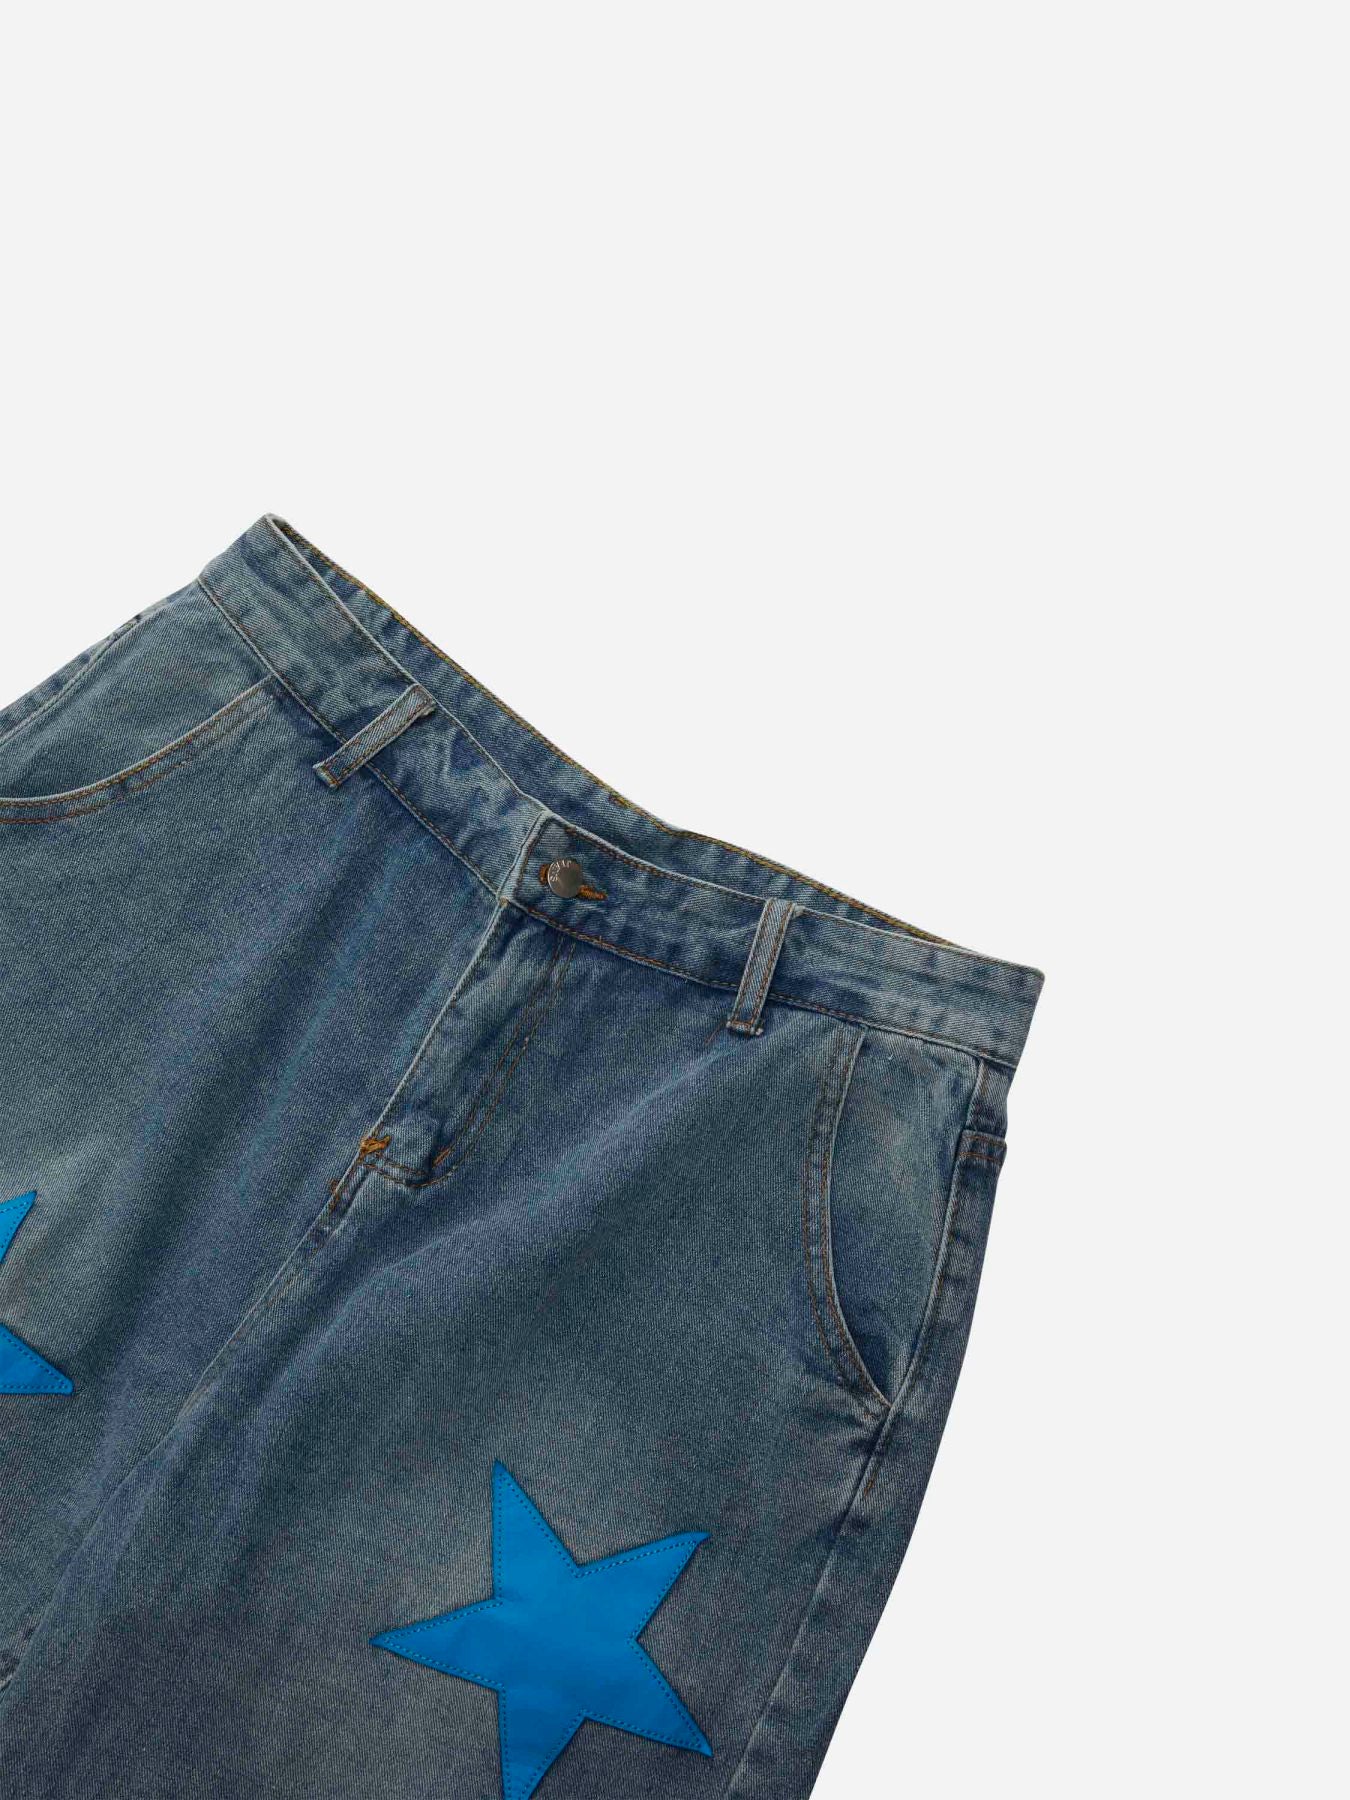 The Supermade Star Embroidered Denim Shorts